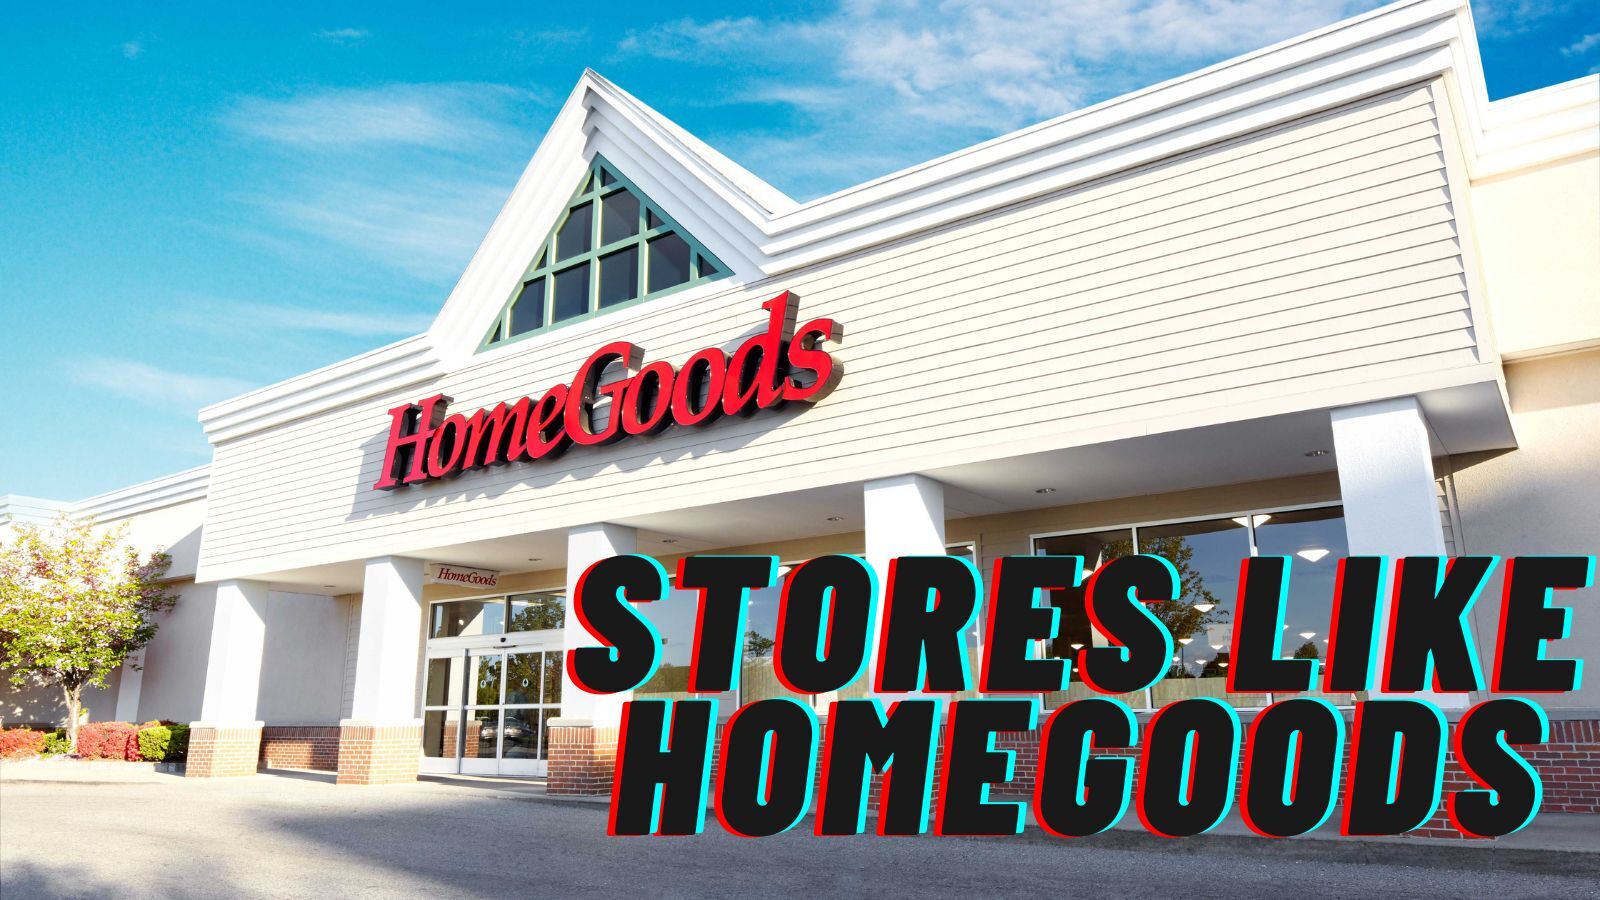 13 Best Stores Like Homegoods to Buy Home Decor & Furniture